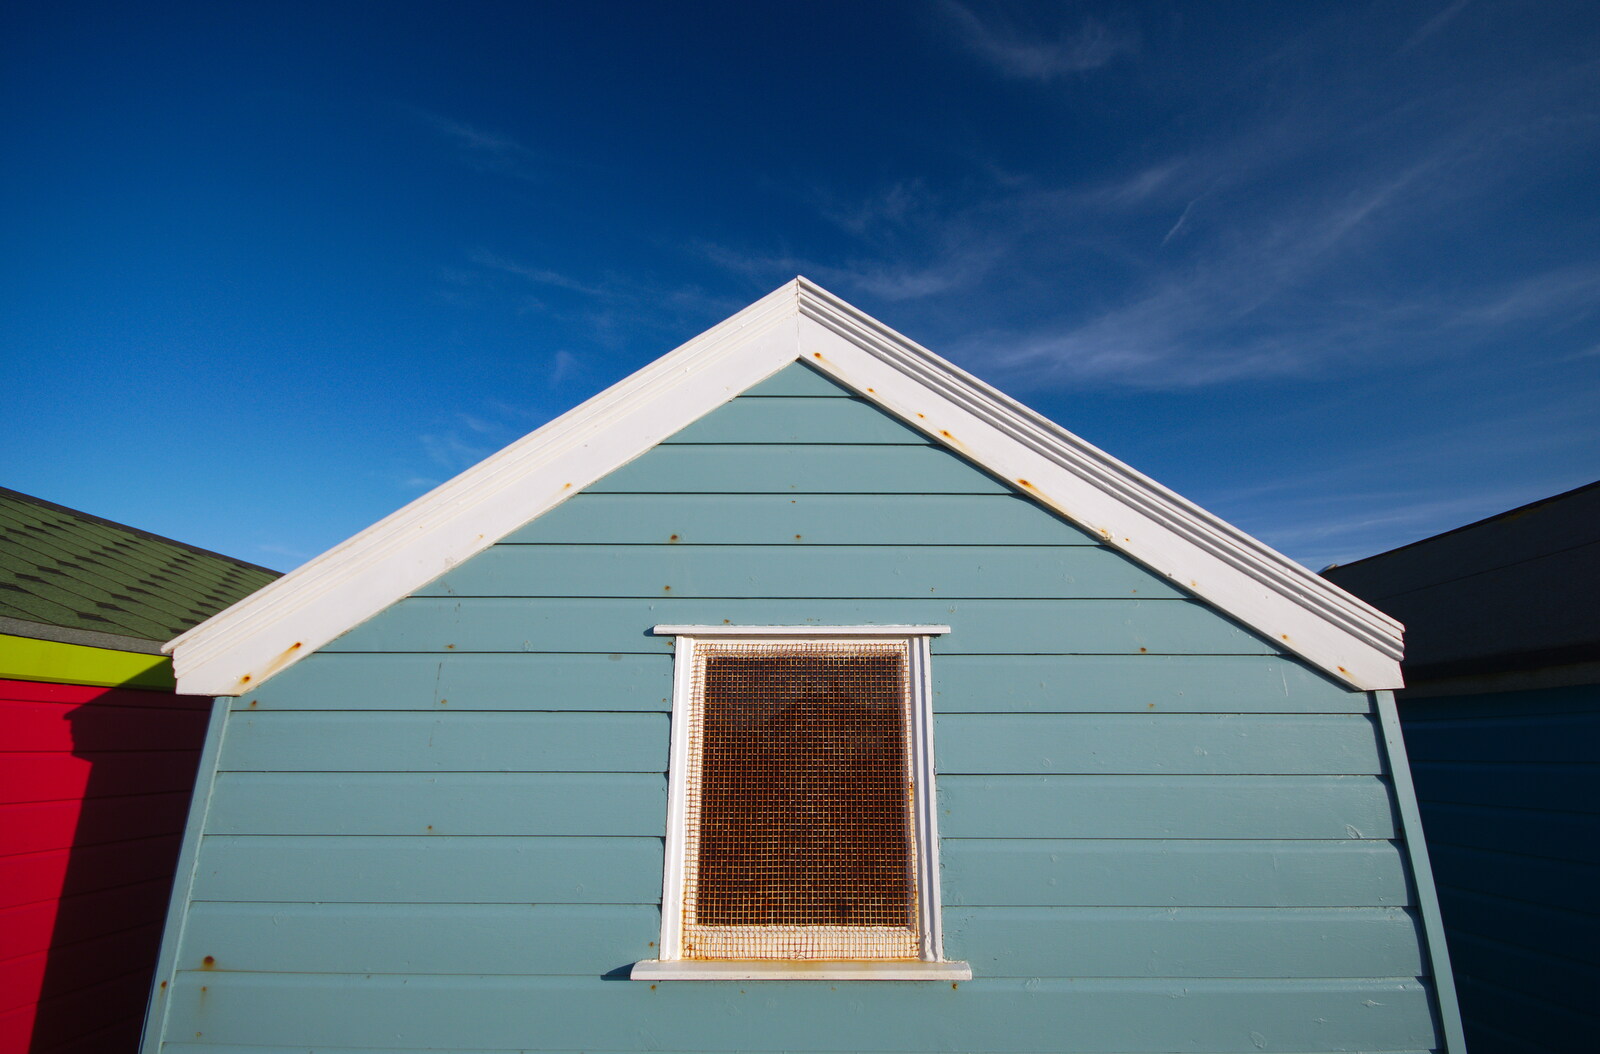 Another Southwold beach hut from A Trip up a Lighthouse, Southwold, Suffolk - 27th October 2019